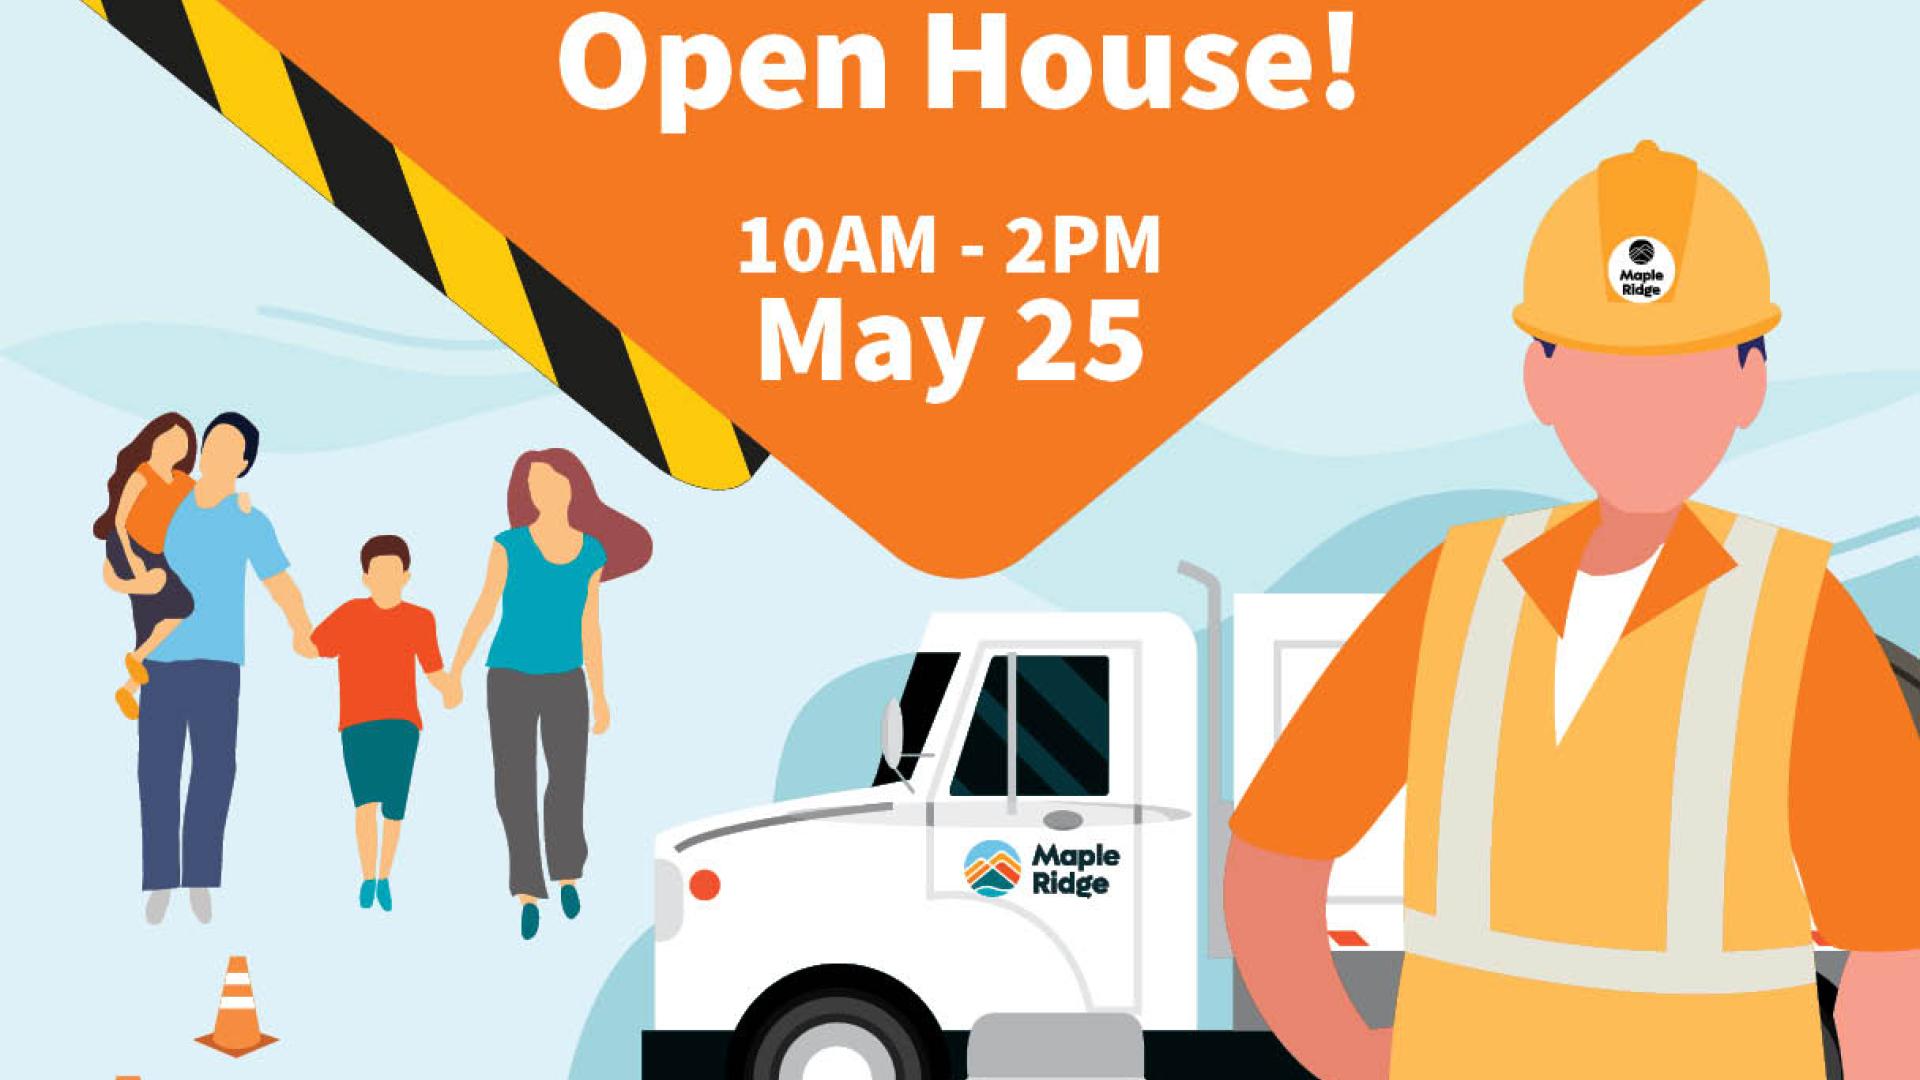 Image includes people going to an event with a public services truck and staff. The text says Public Works Week Open House on May 25